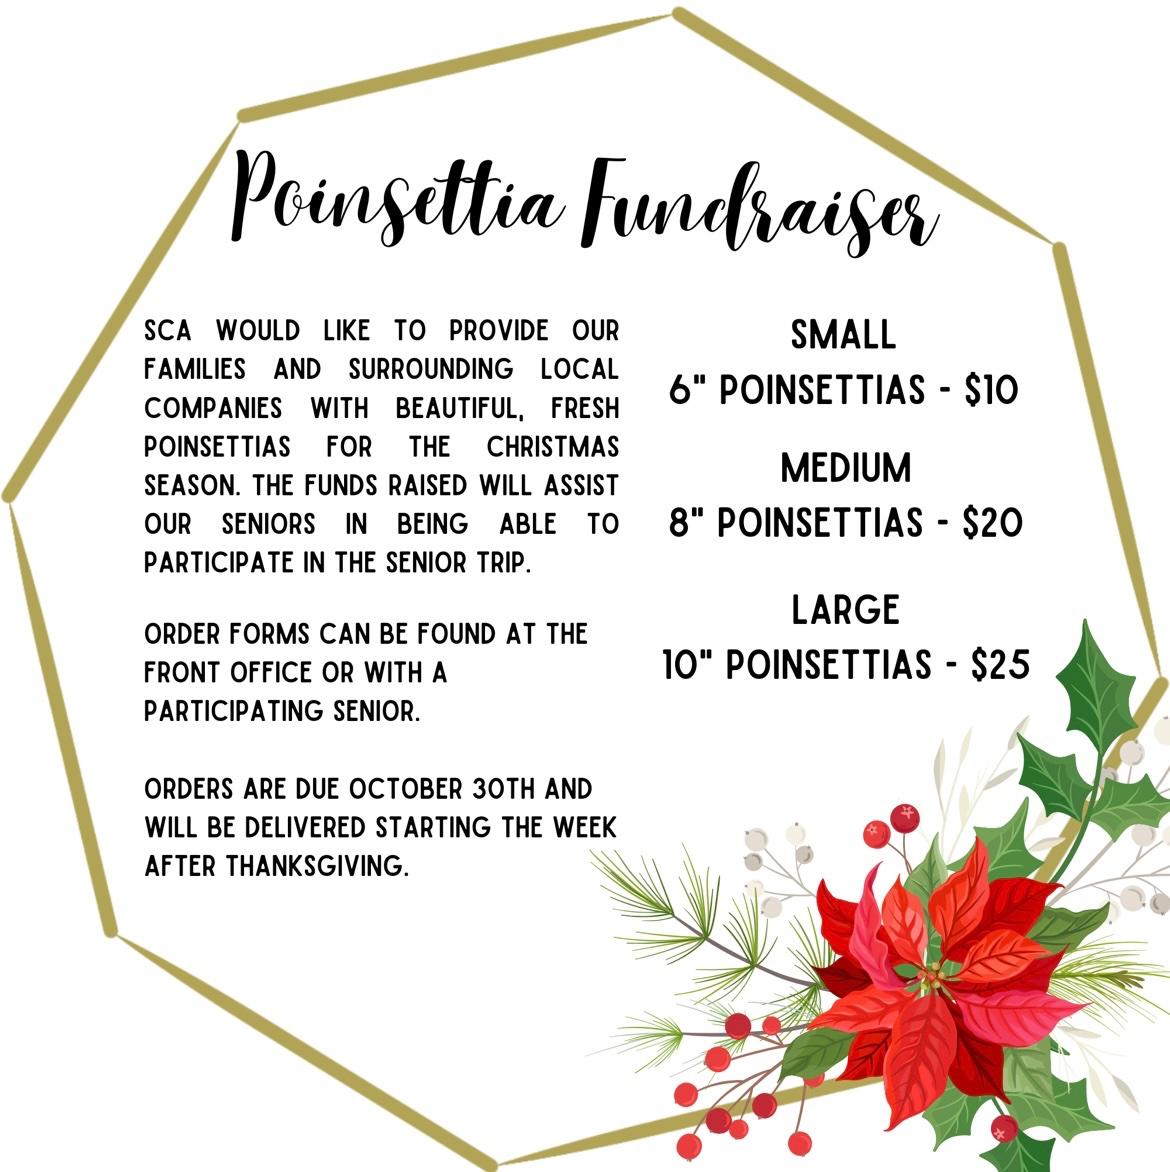 🎄Poinsettia Fundraiser🎄 SCA WOULD LIKE TO PROVIDE OUR FAMILIES AND SURROUNDING LOCAL COMPANIES WITH BEAUTIFUL, FRESH POINSETTIAS FOR THE CHRISTMAS SEASON. THE FUNDS RAISED WILL ASSIST OUR SENIORS IN BEING ABLE TO PARTICIPATE IN THE SENIOR TRIP.